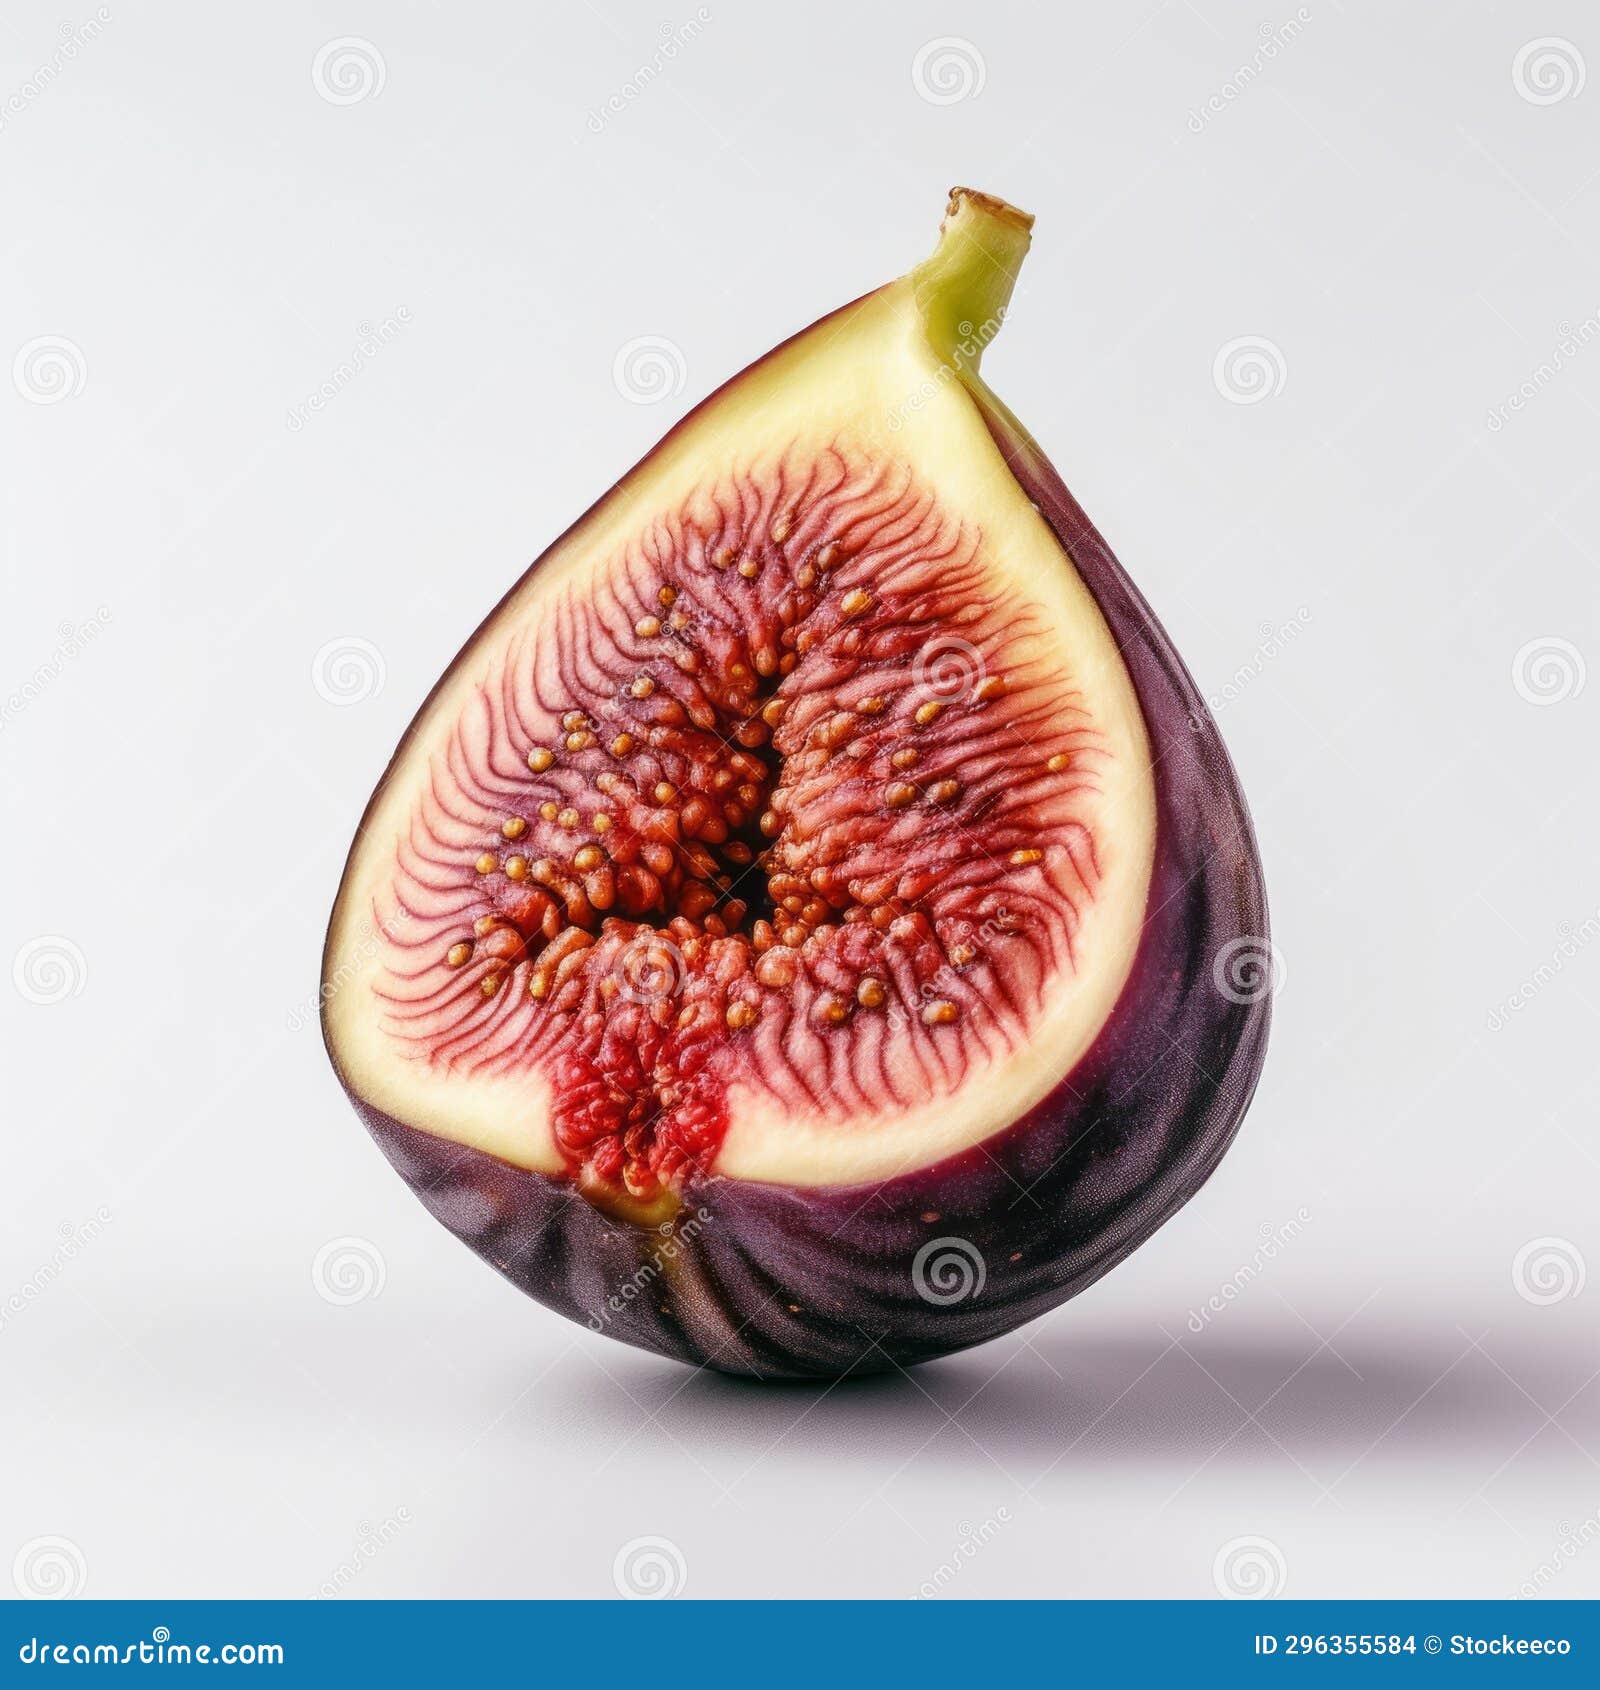 vibrant fig photography: raw, colorized, and detailed